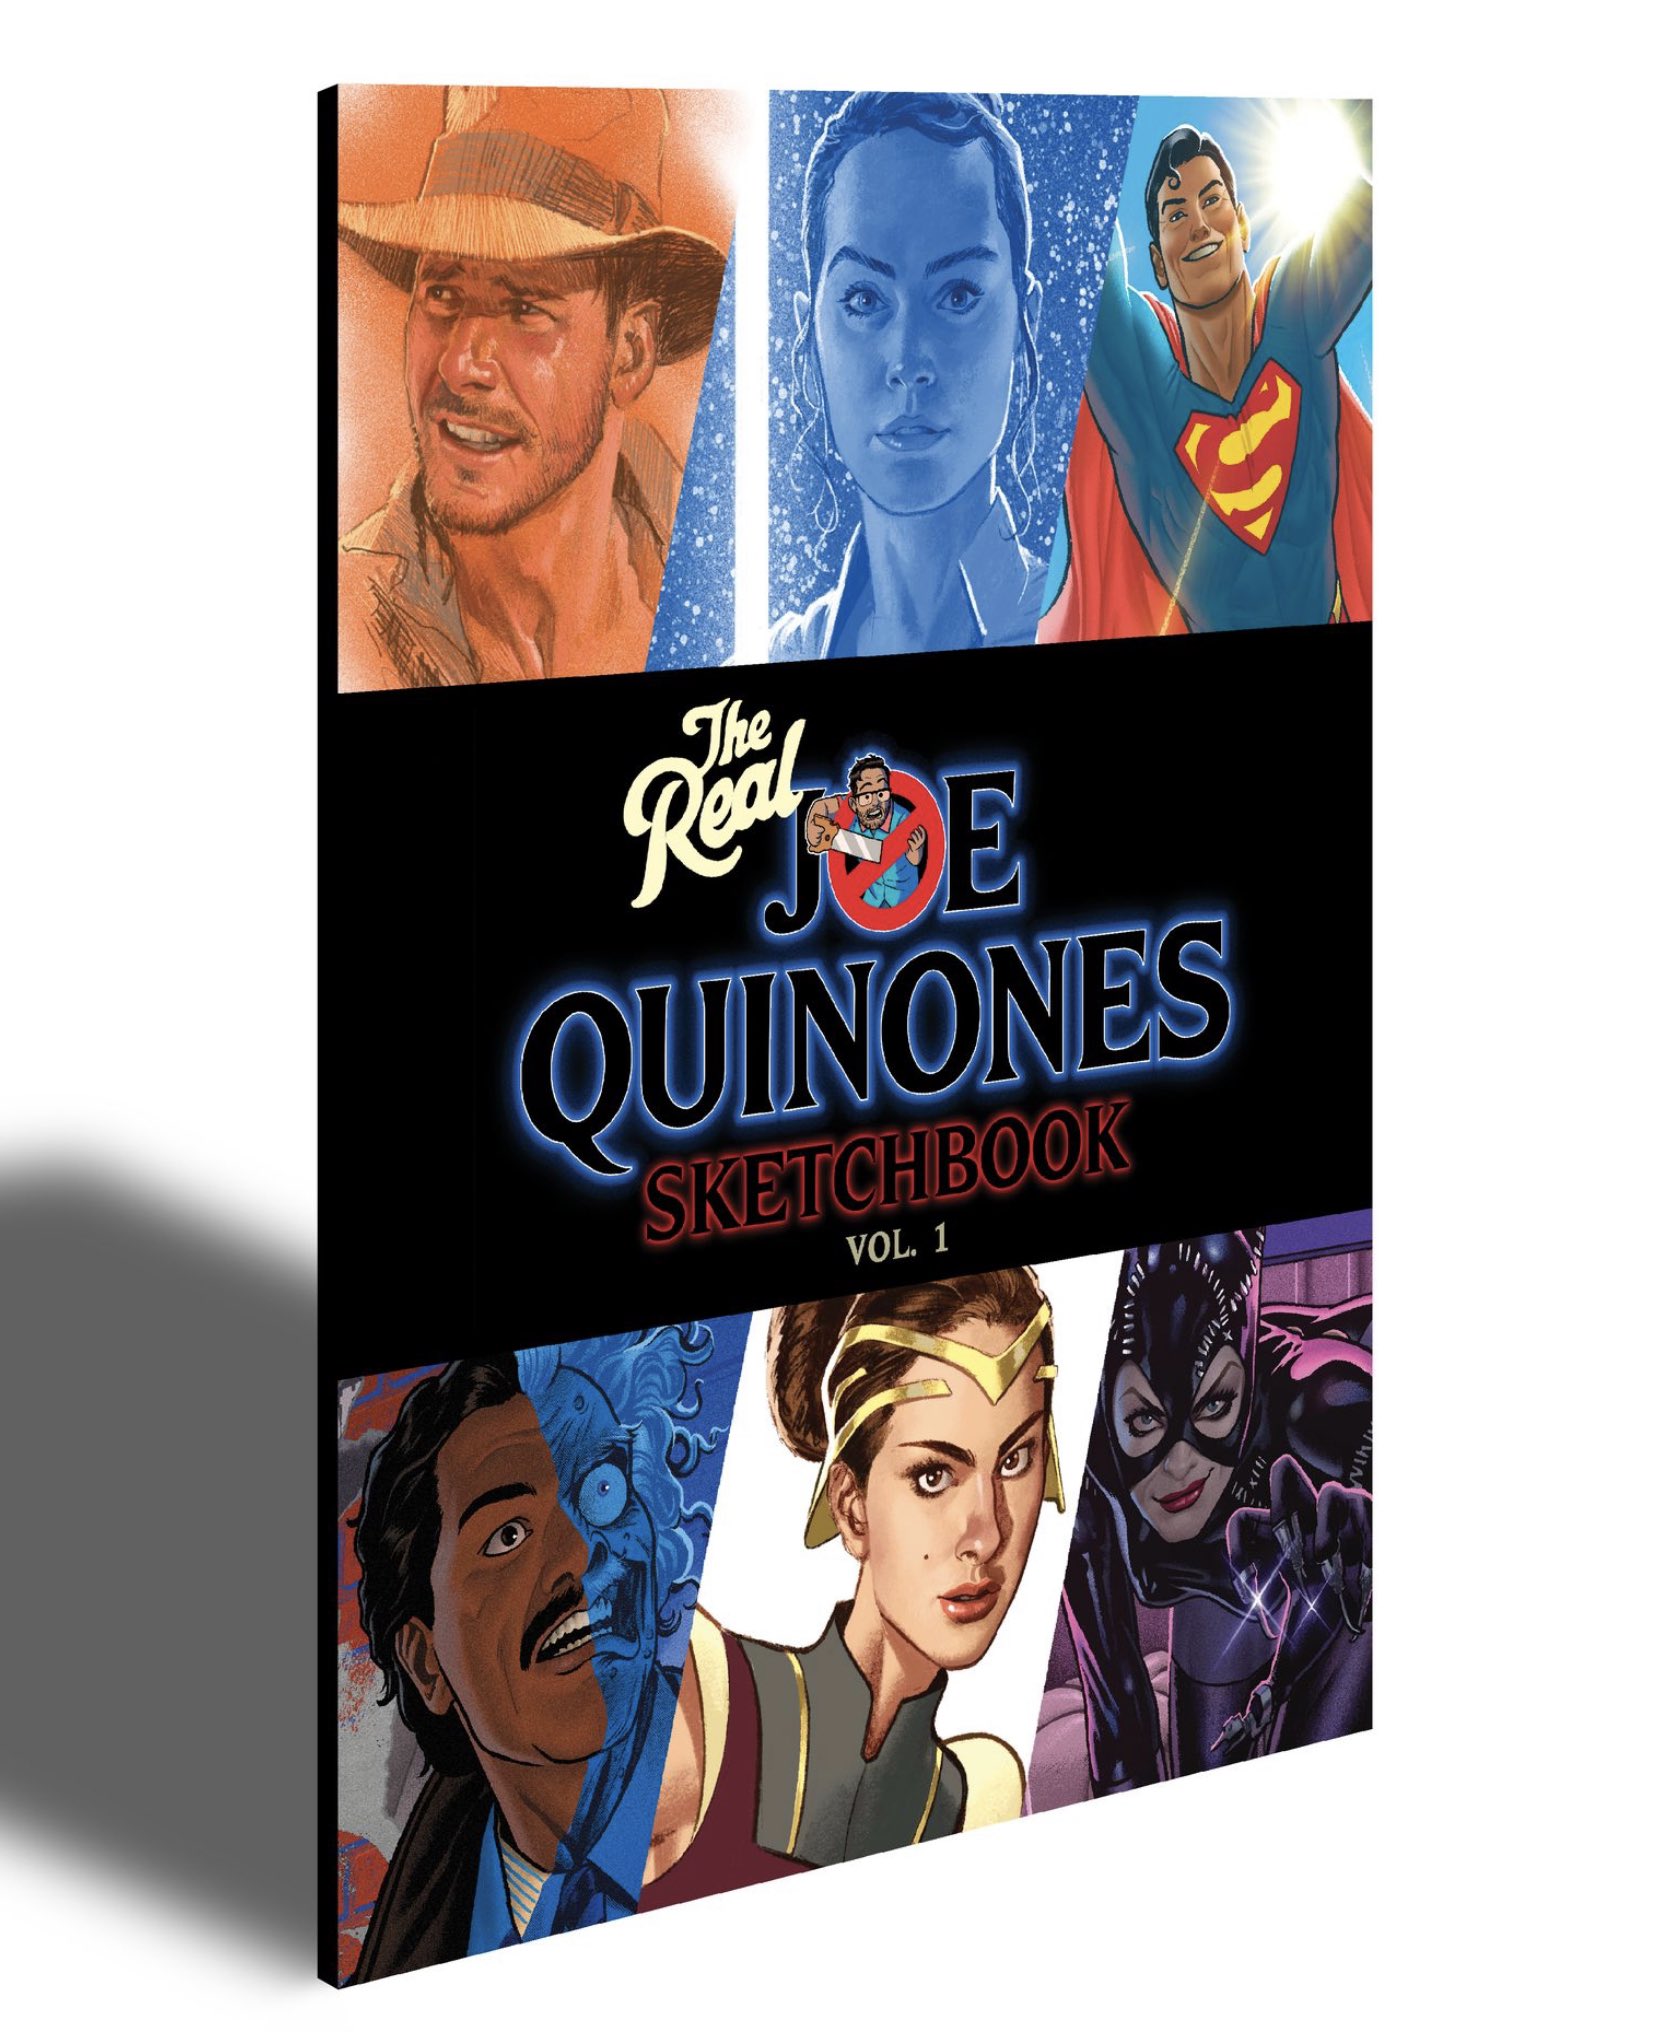 Joe Quinones on X: PRE-ORDER for my new sketchbook is LIVE! My first big  sketchbook! This 40-page, full-color book is packed to the brim, showcasing  illustrations, preliminary sketches, pin-ups, commissions and more.